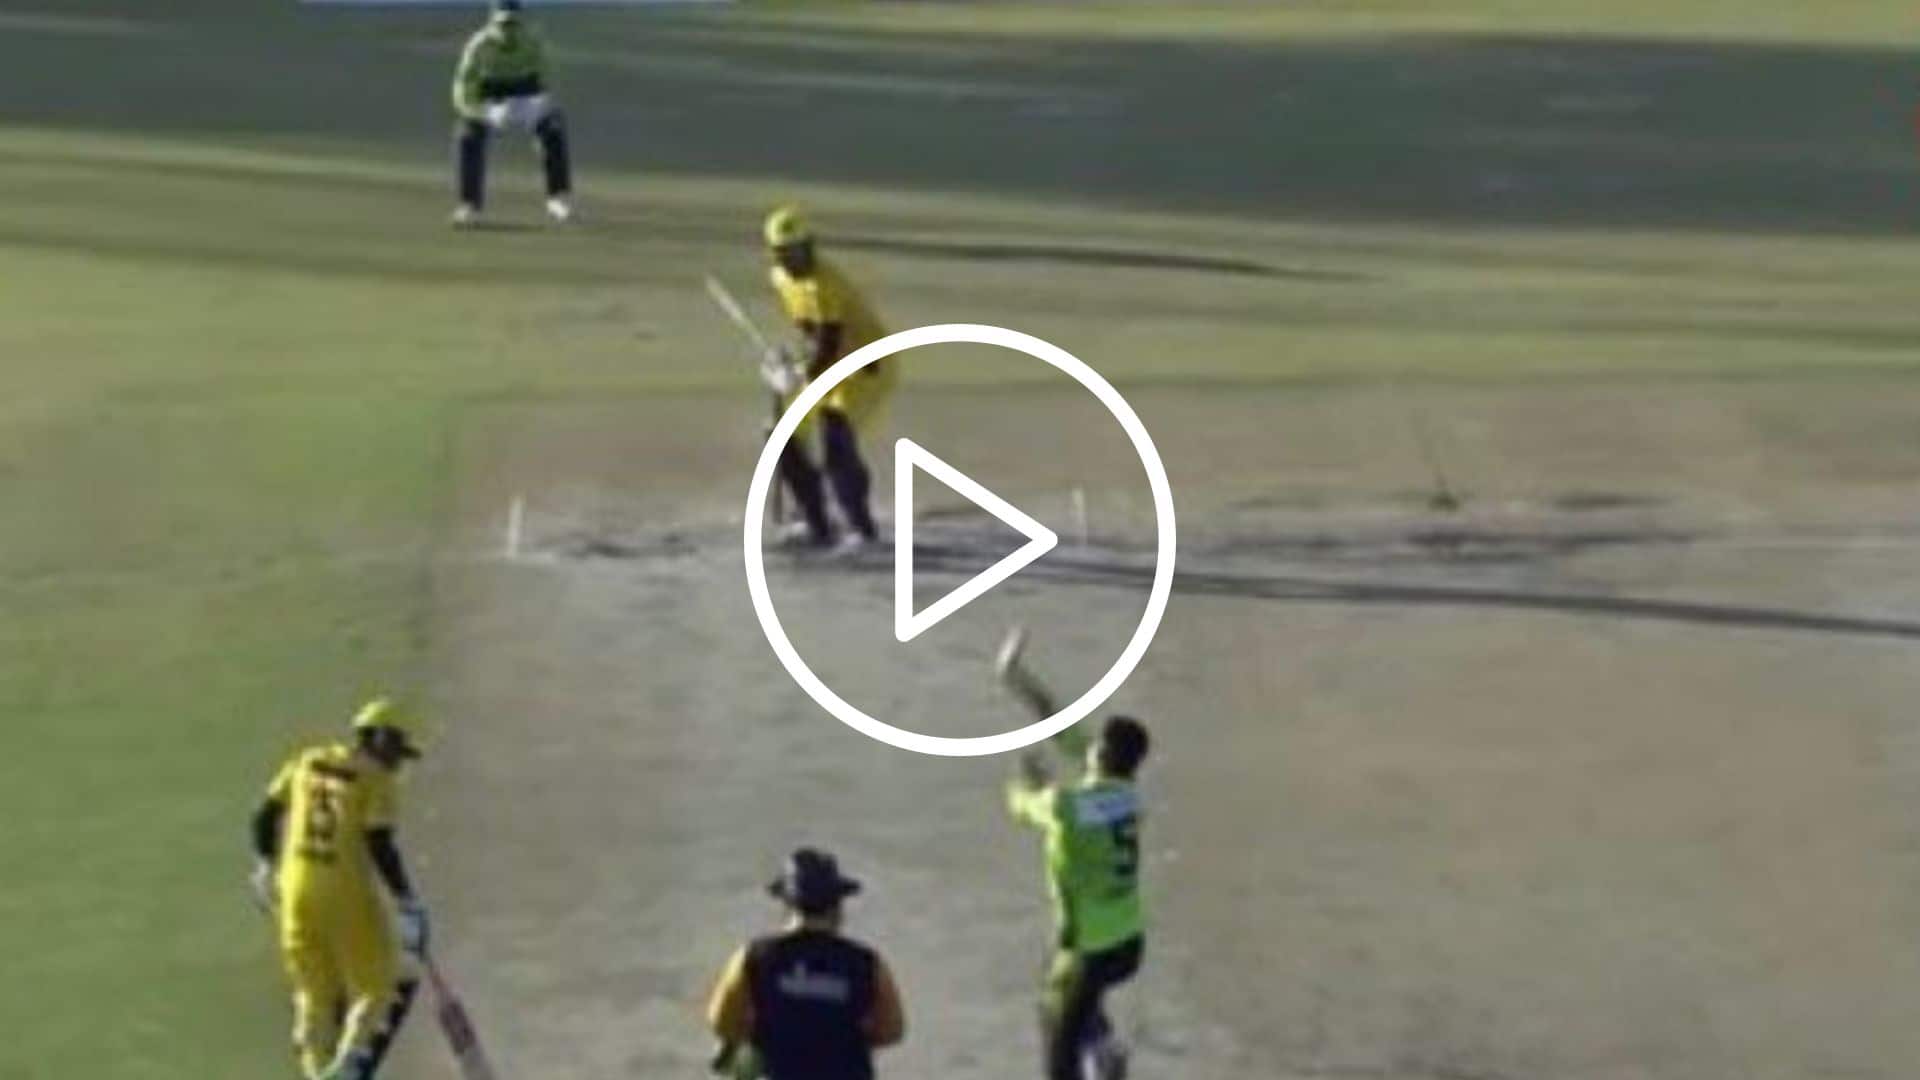 [Watch] Yusuf Pathan Smashes Mohammad Amir For 24 Runs; Pulls Off An Incredible Win